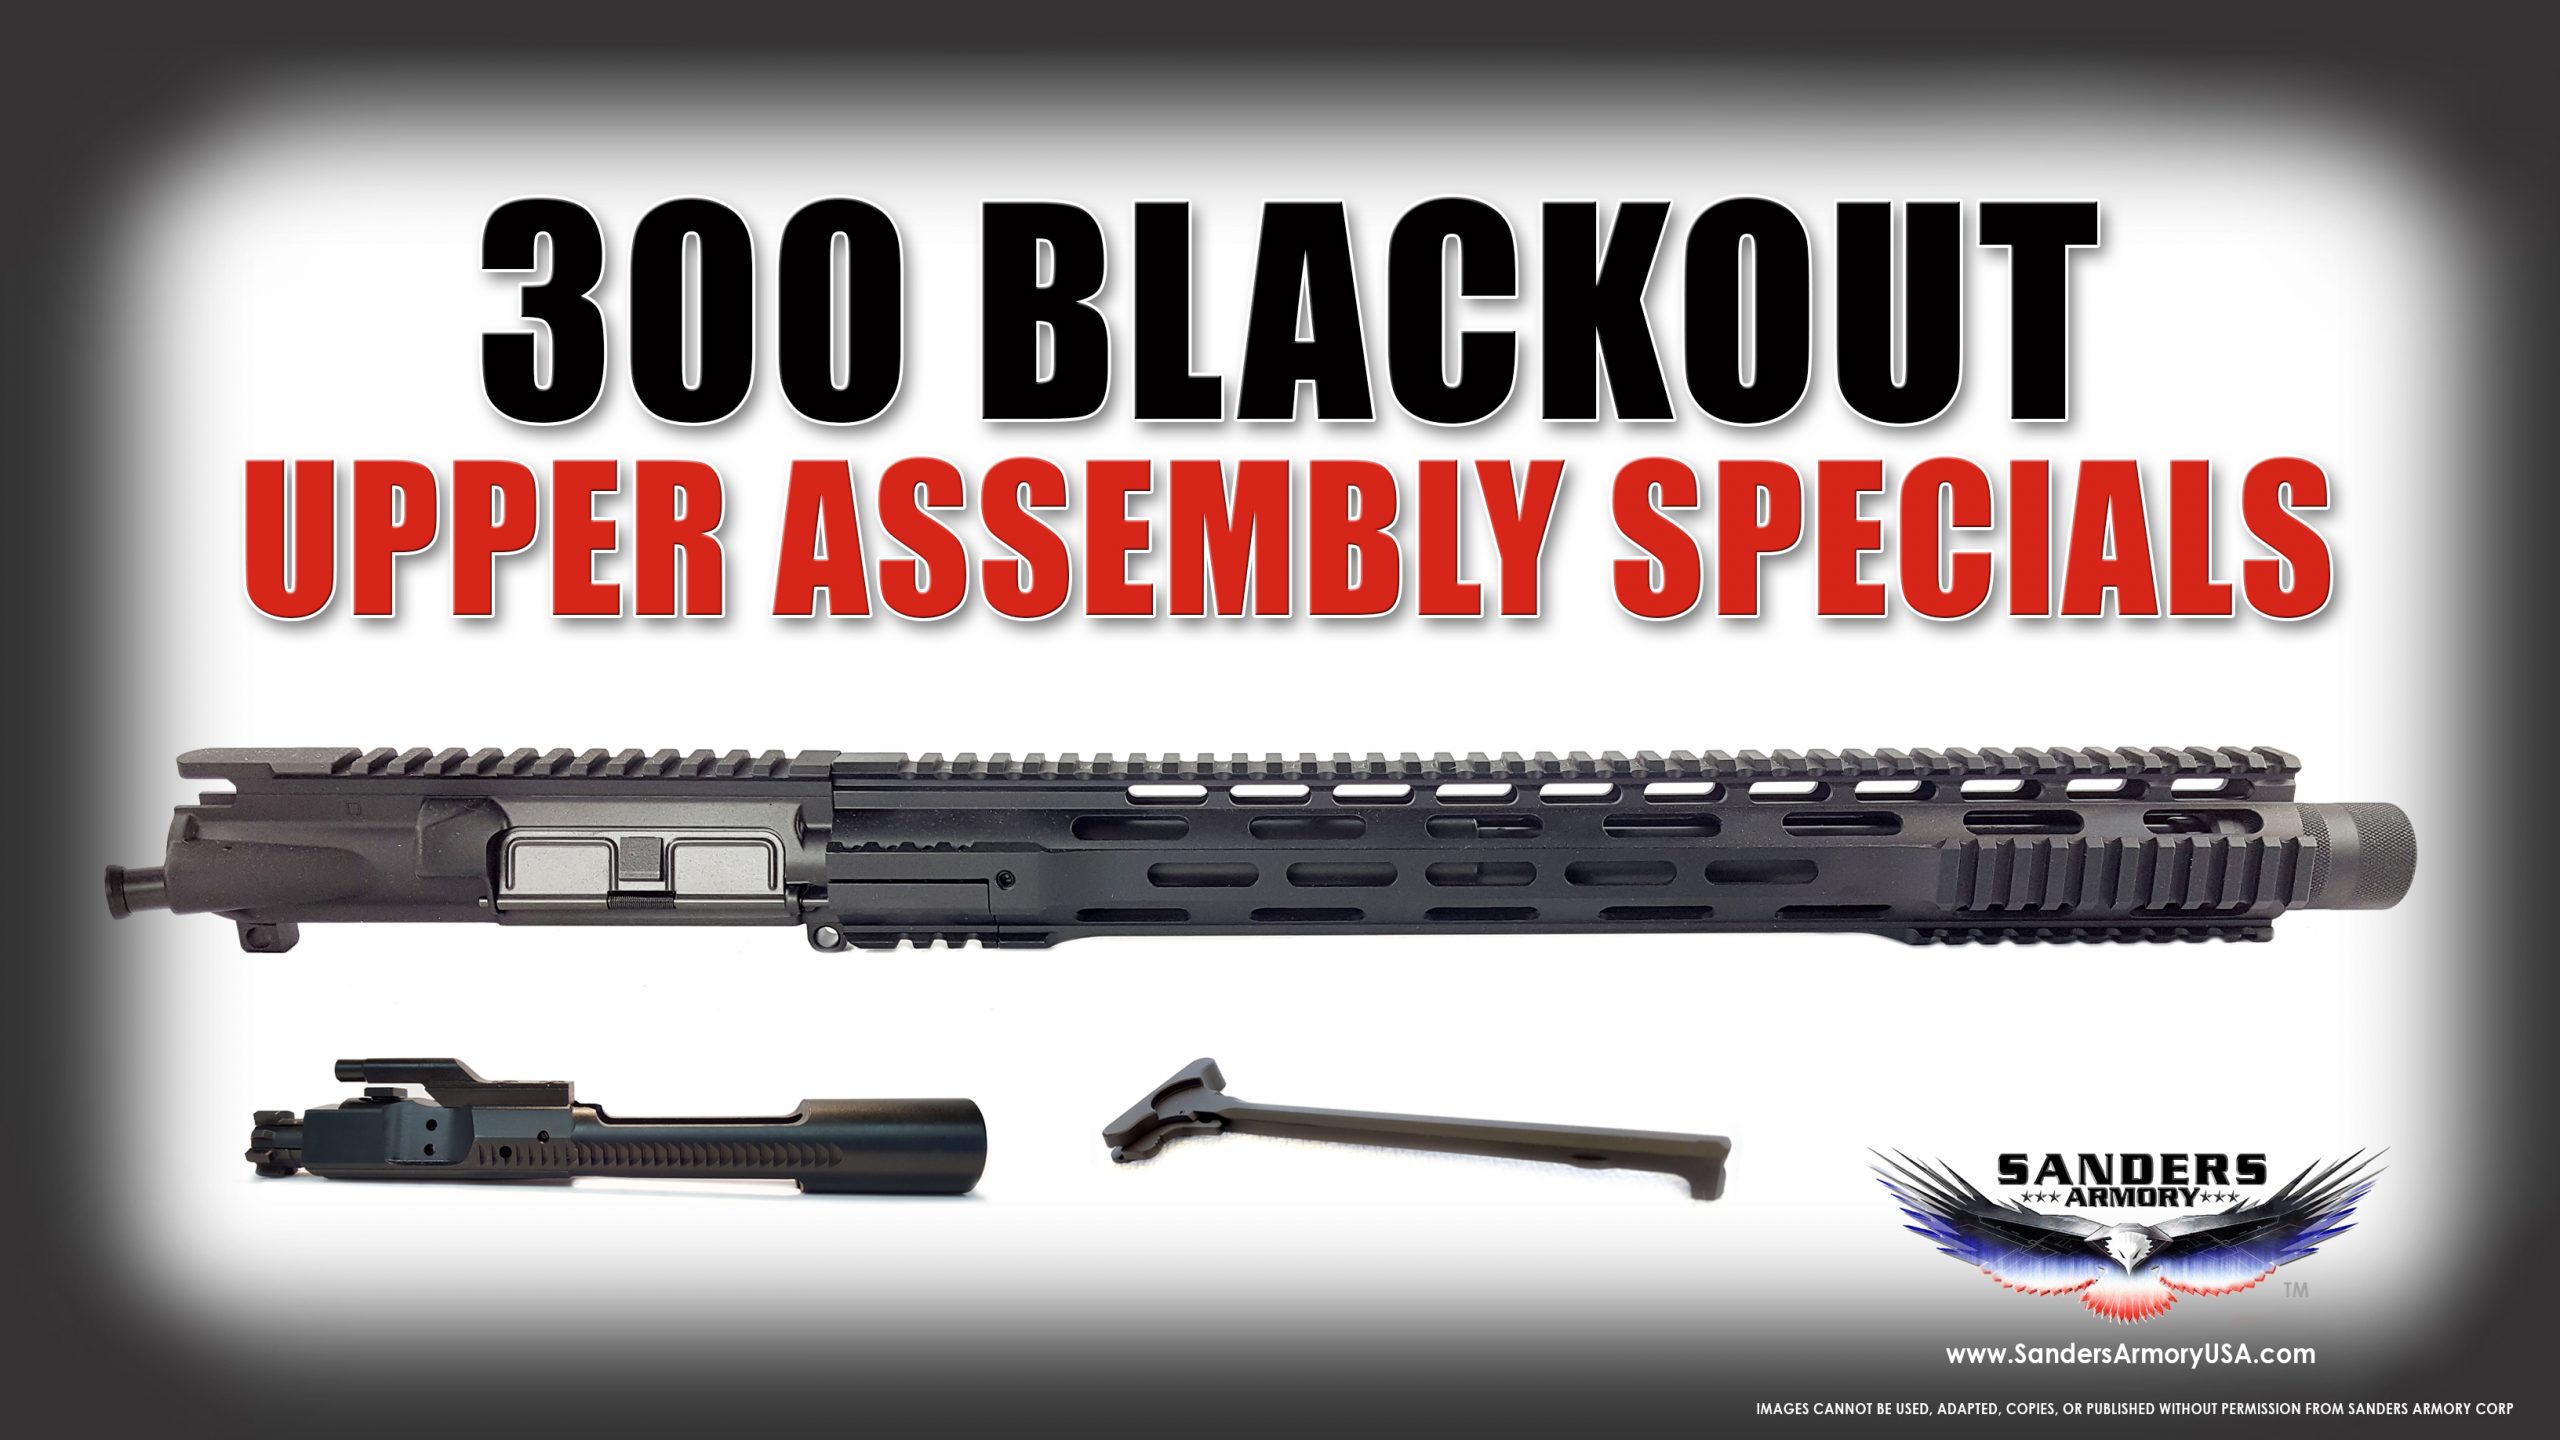 Sanders Armory 300 ACC Blackout Upper Assembly